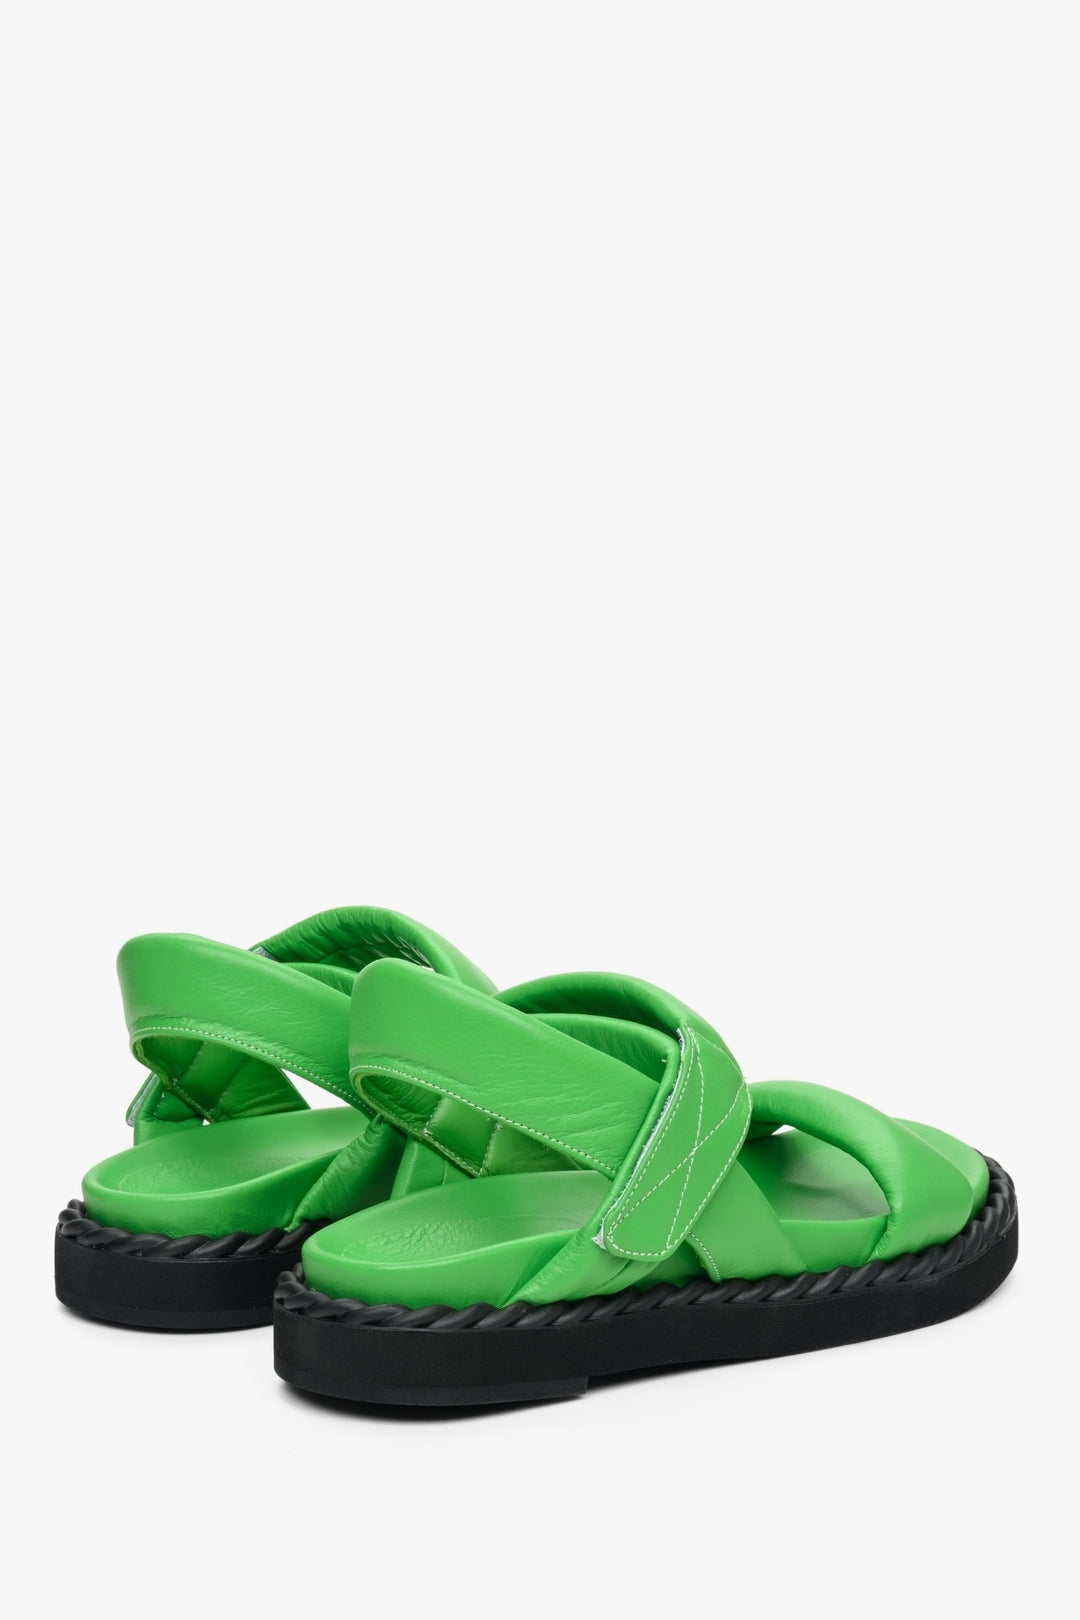 Women's green flat sandals for summer on a comfortable, flexible sole - the presentation of the back and side of the shoes.